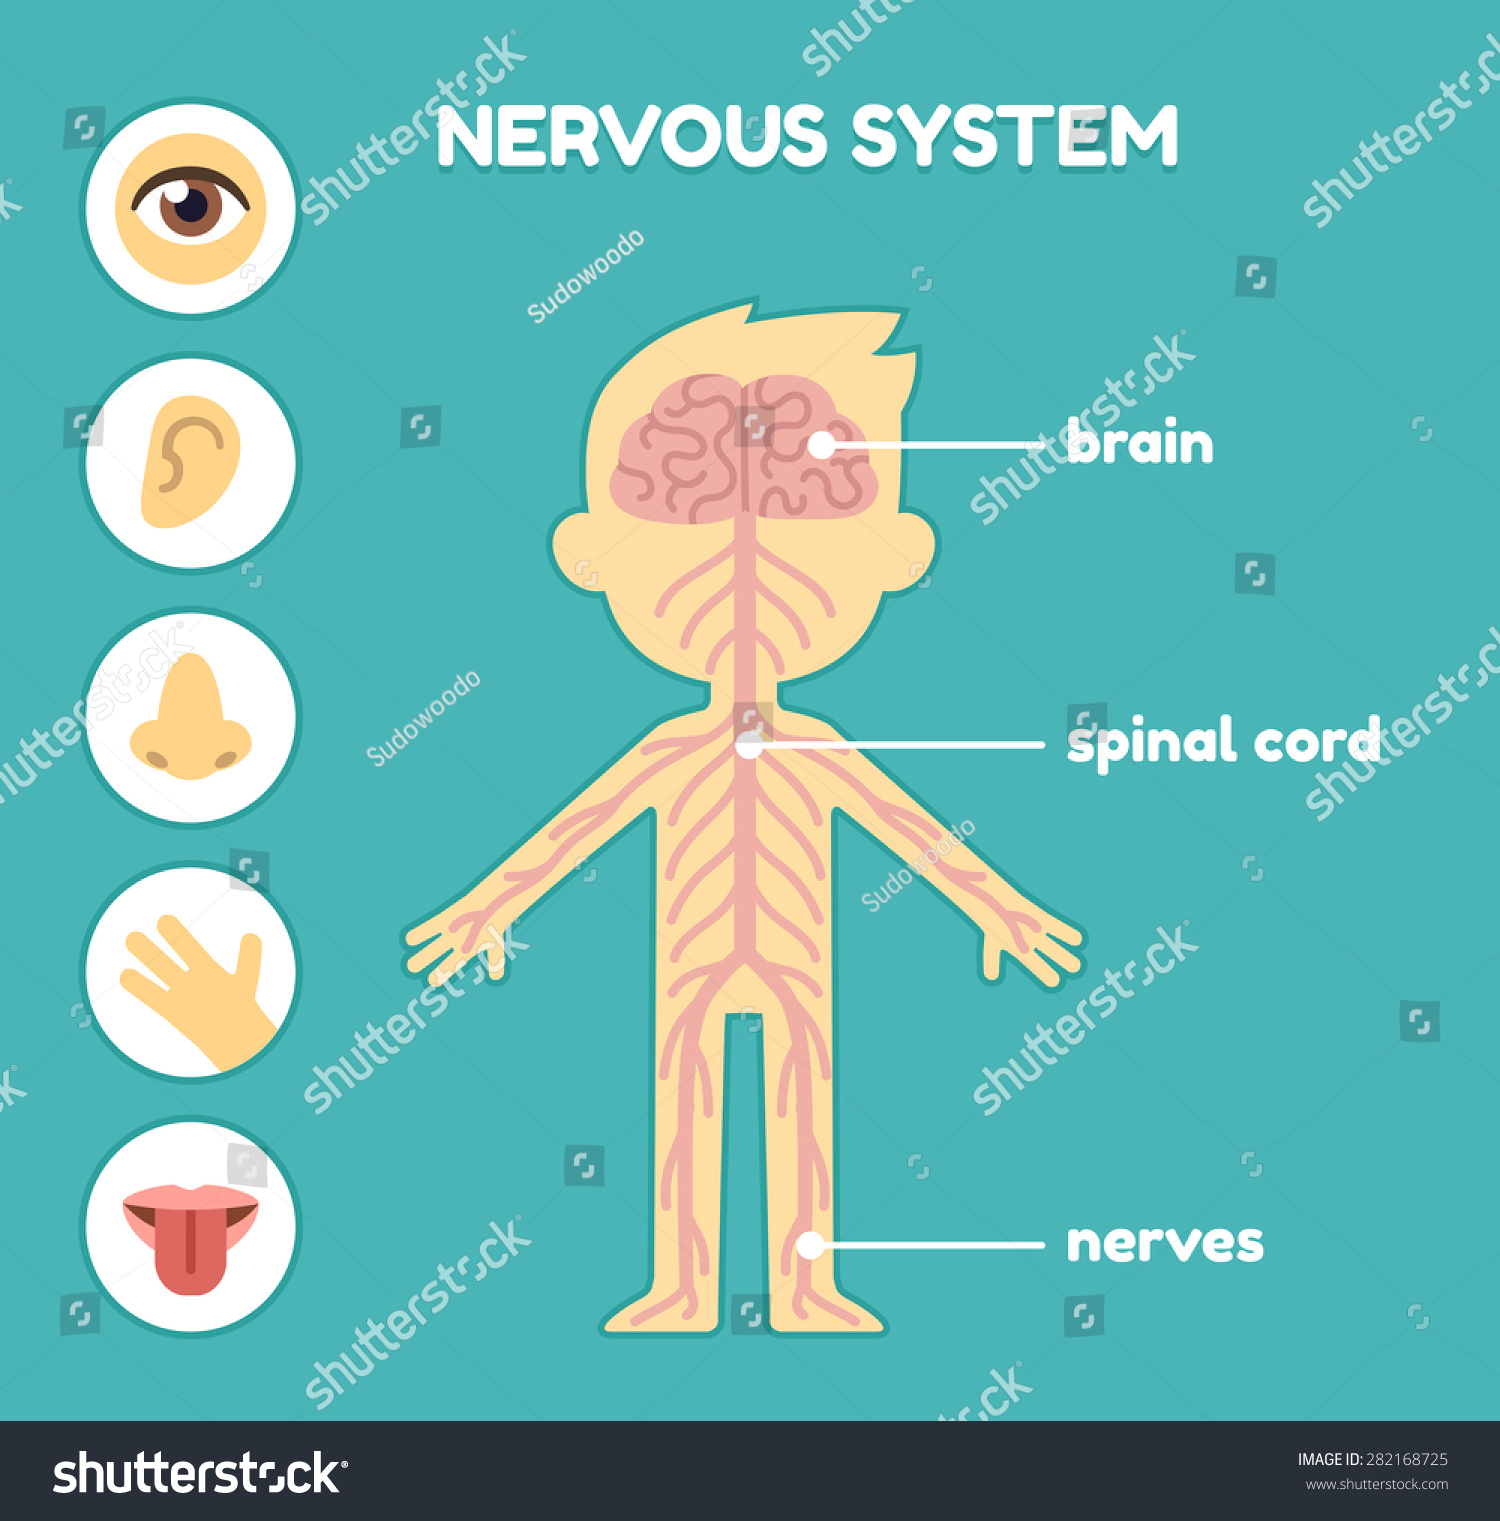 Nervous System Educational Anatomy Chart Kids Stock Vector ...